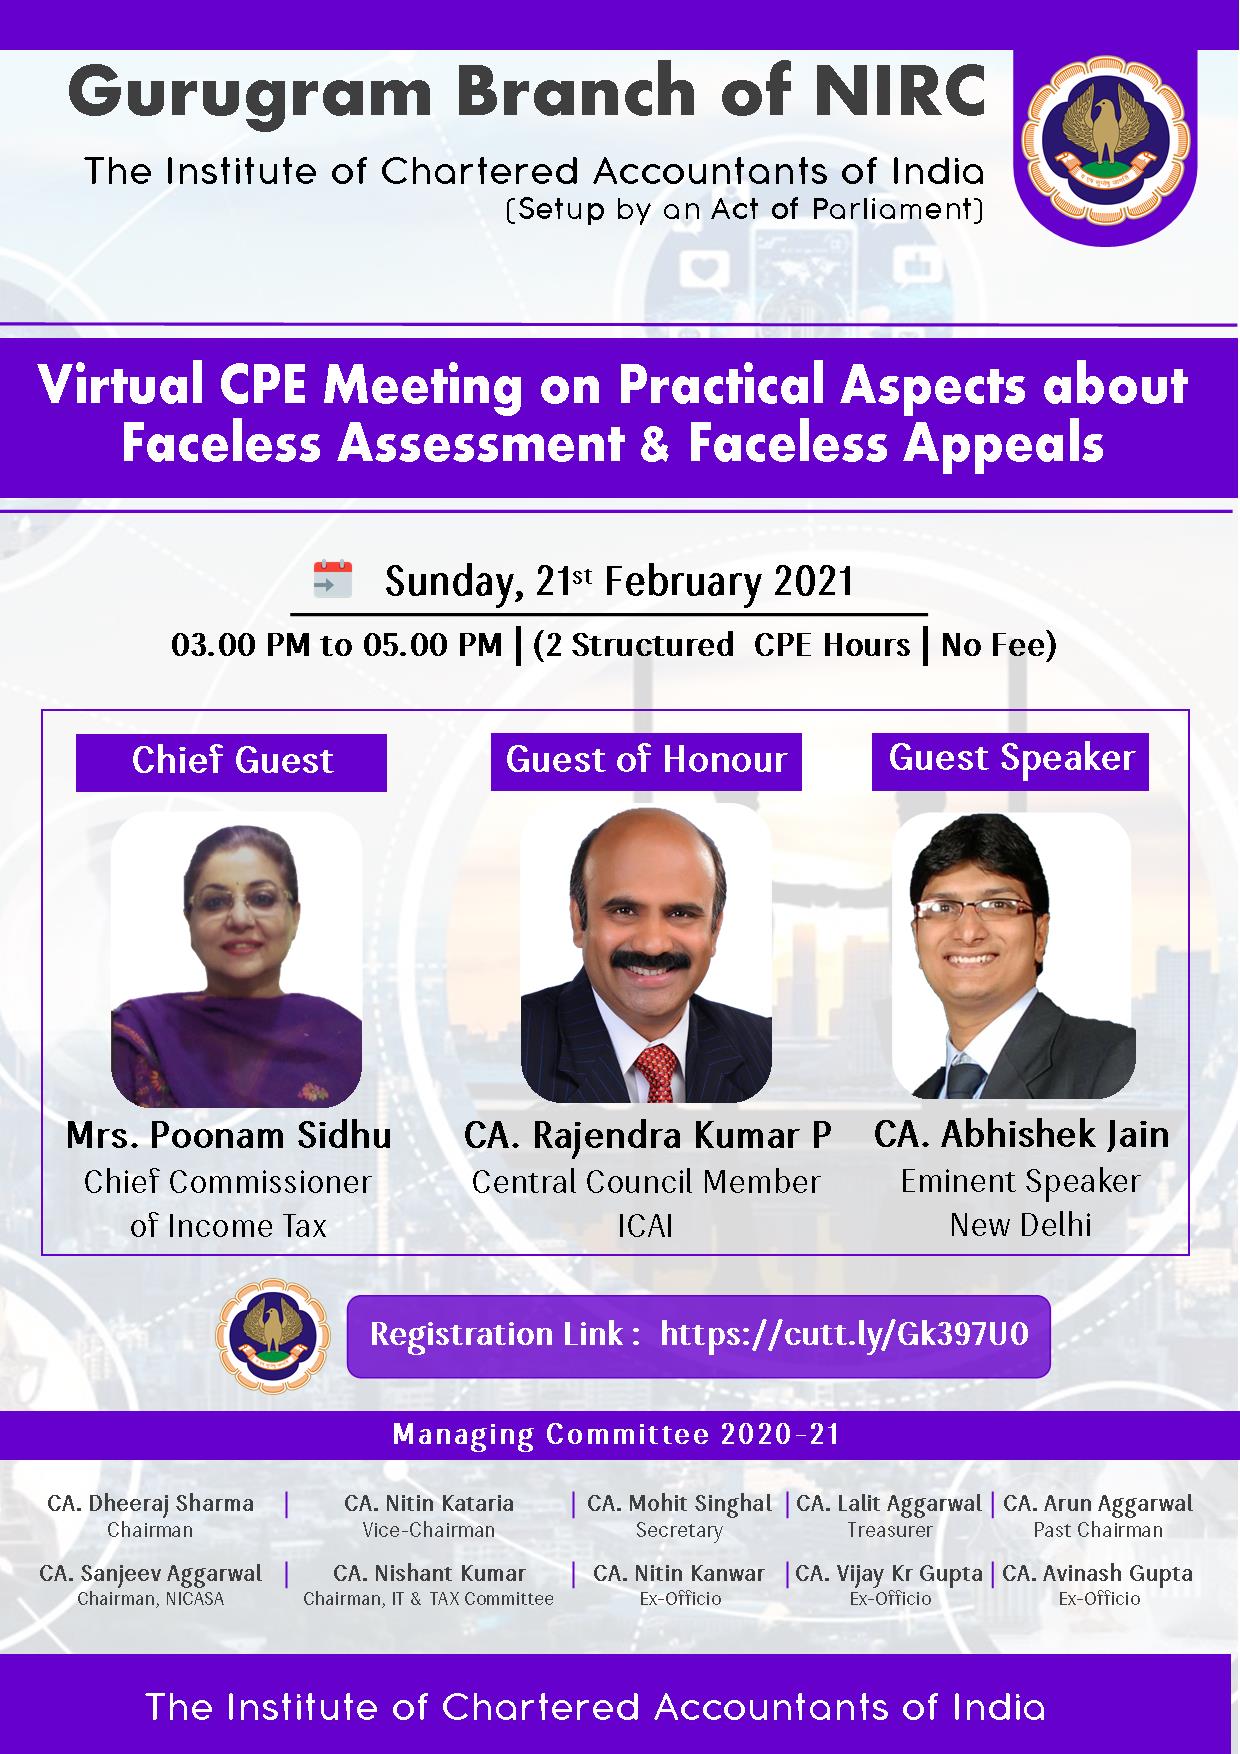 Virtual CPE Meeting on Practical Aspects about Faceless Assessment & Faceless Appeals